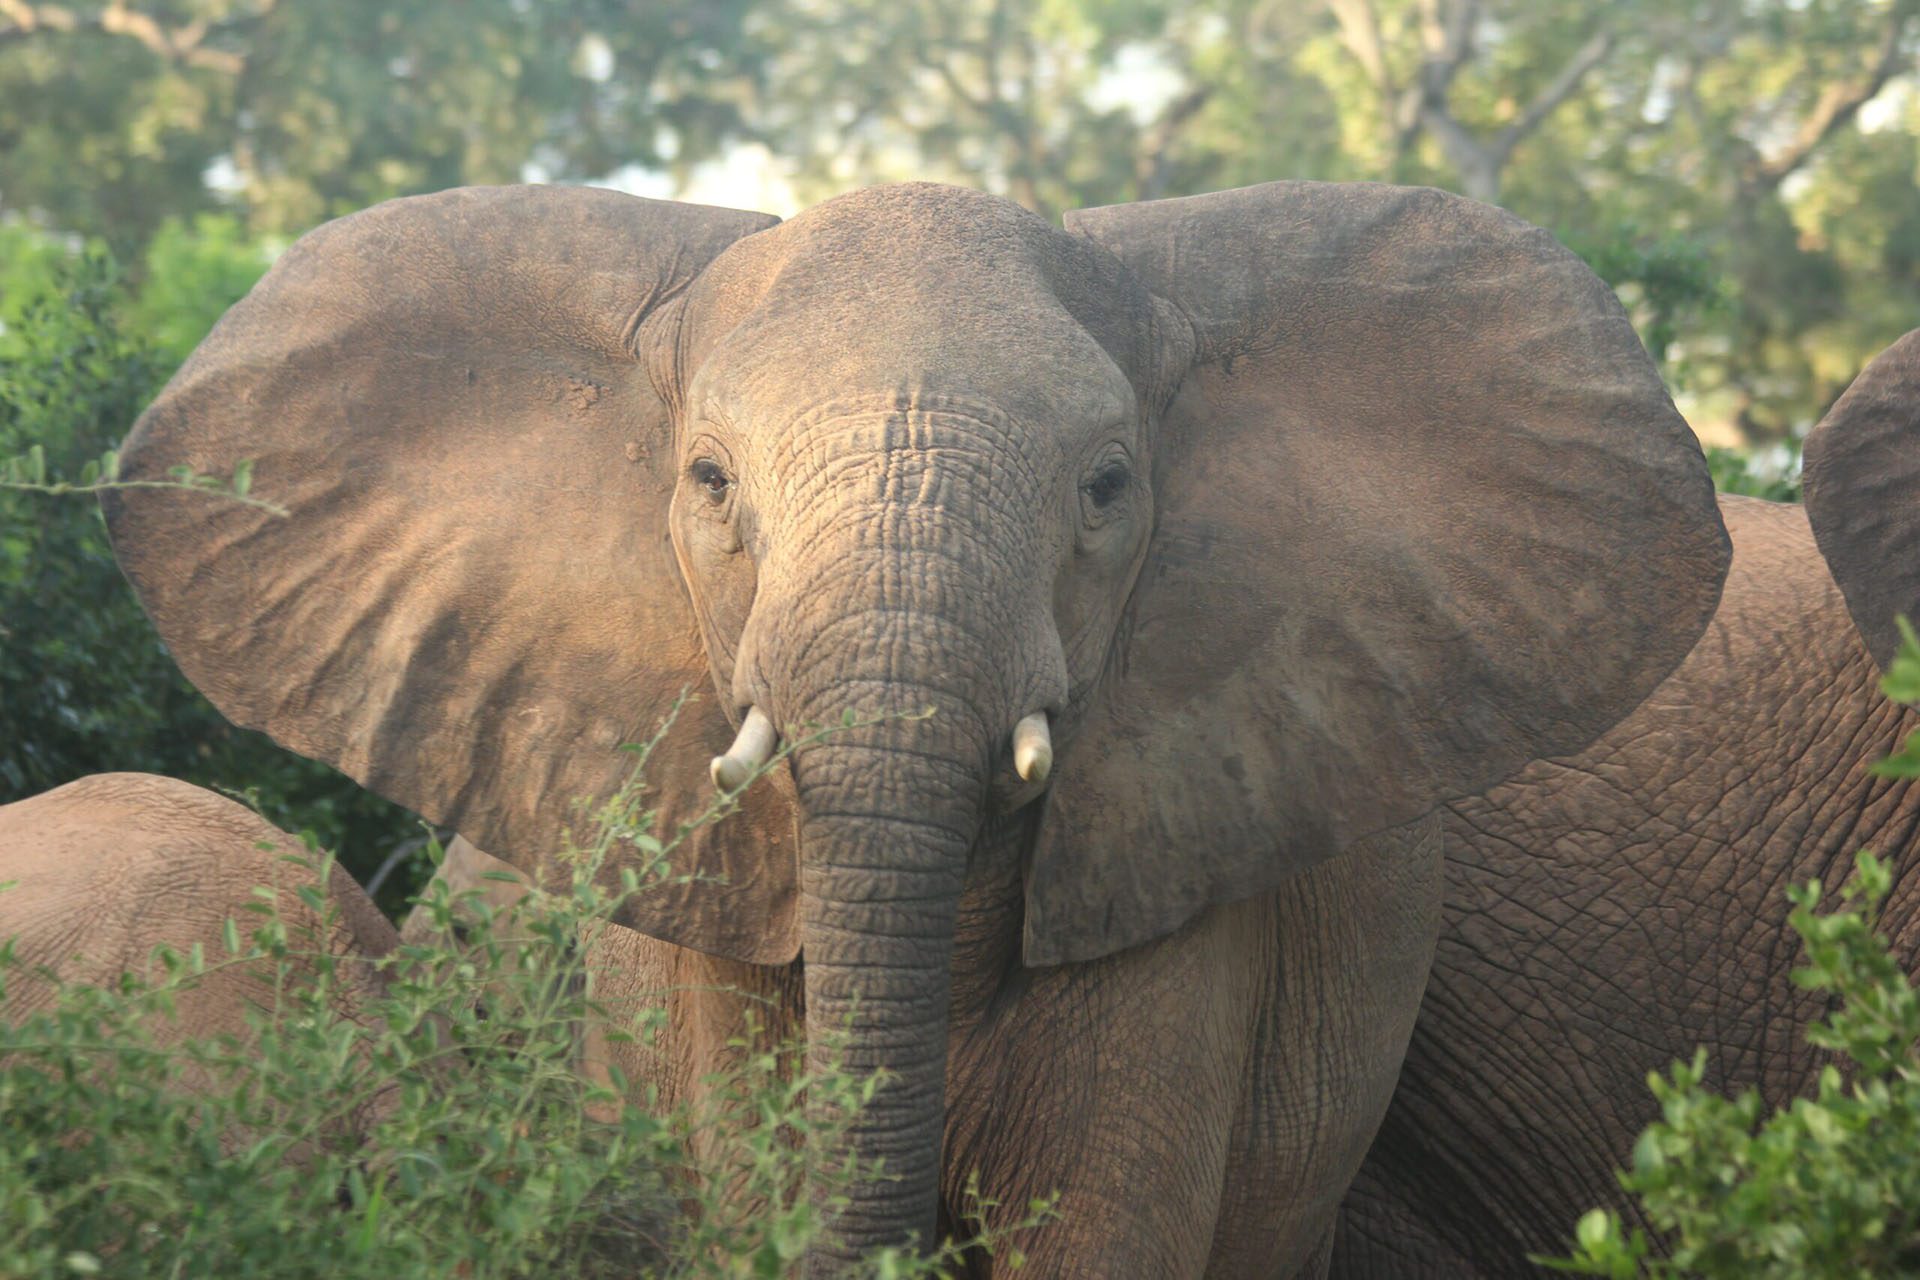 a close up of an elephant with trees in the background.